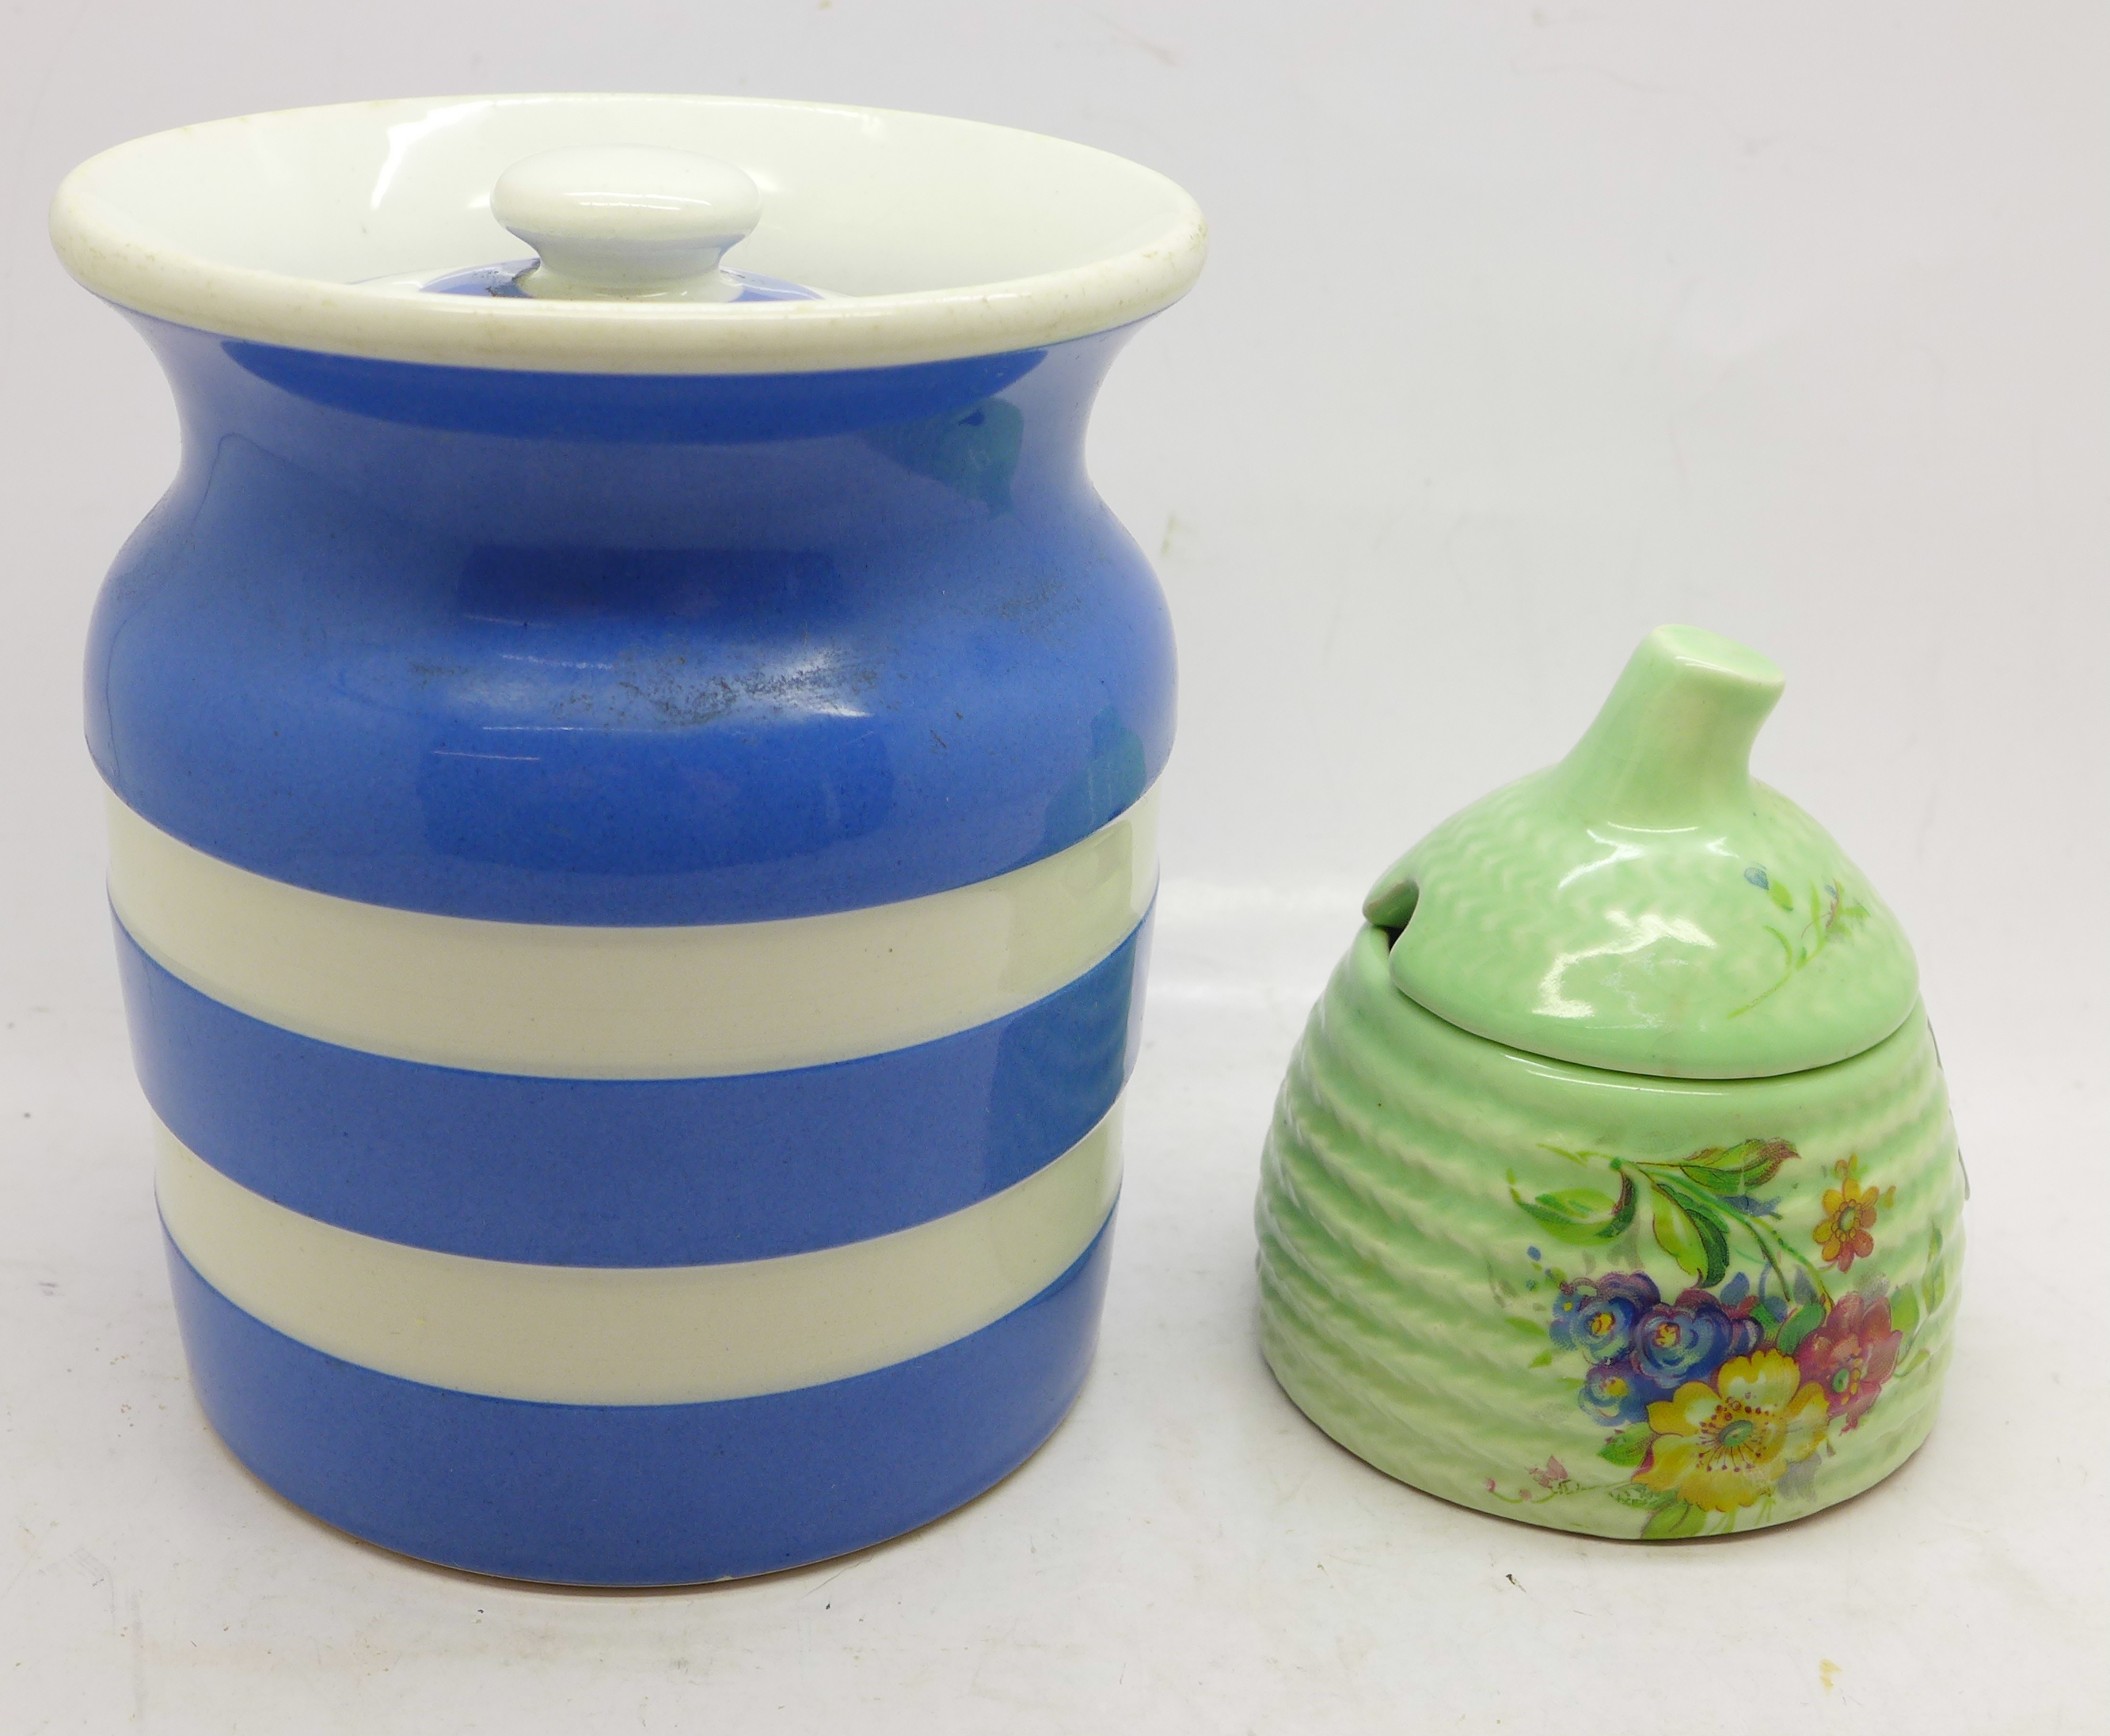 A Clarice Cliff preserve and a T.G. Green storage jar